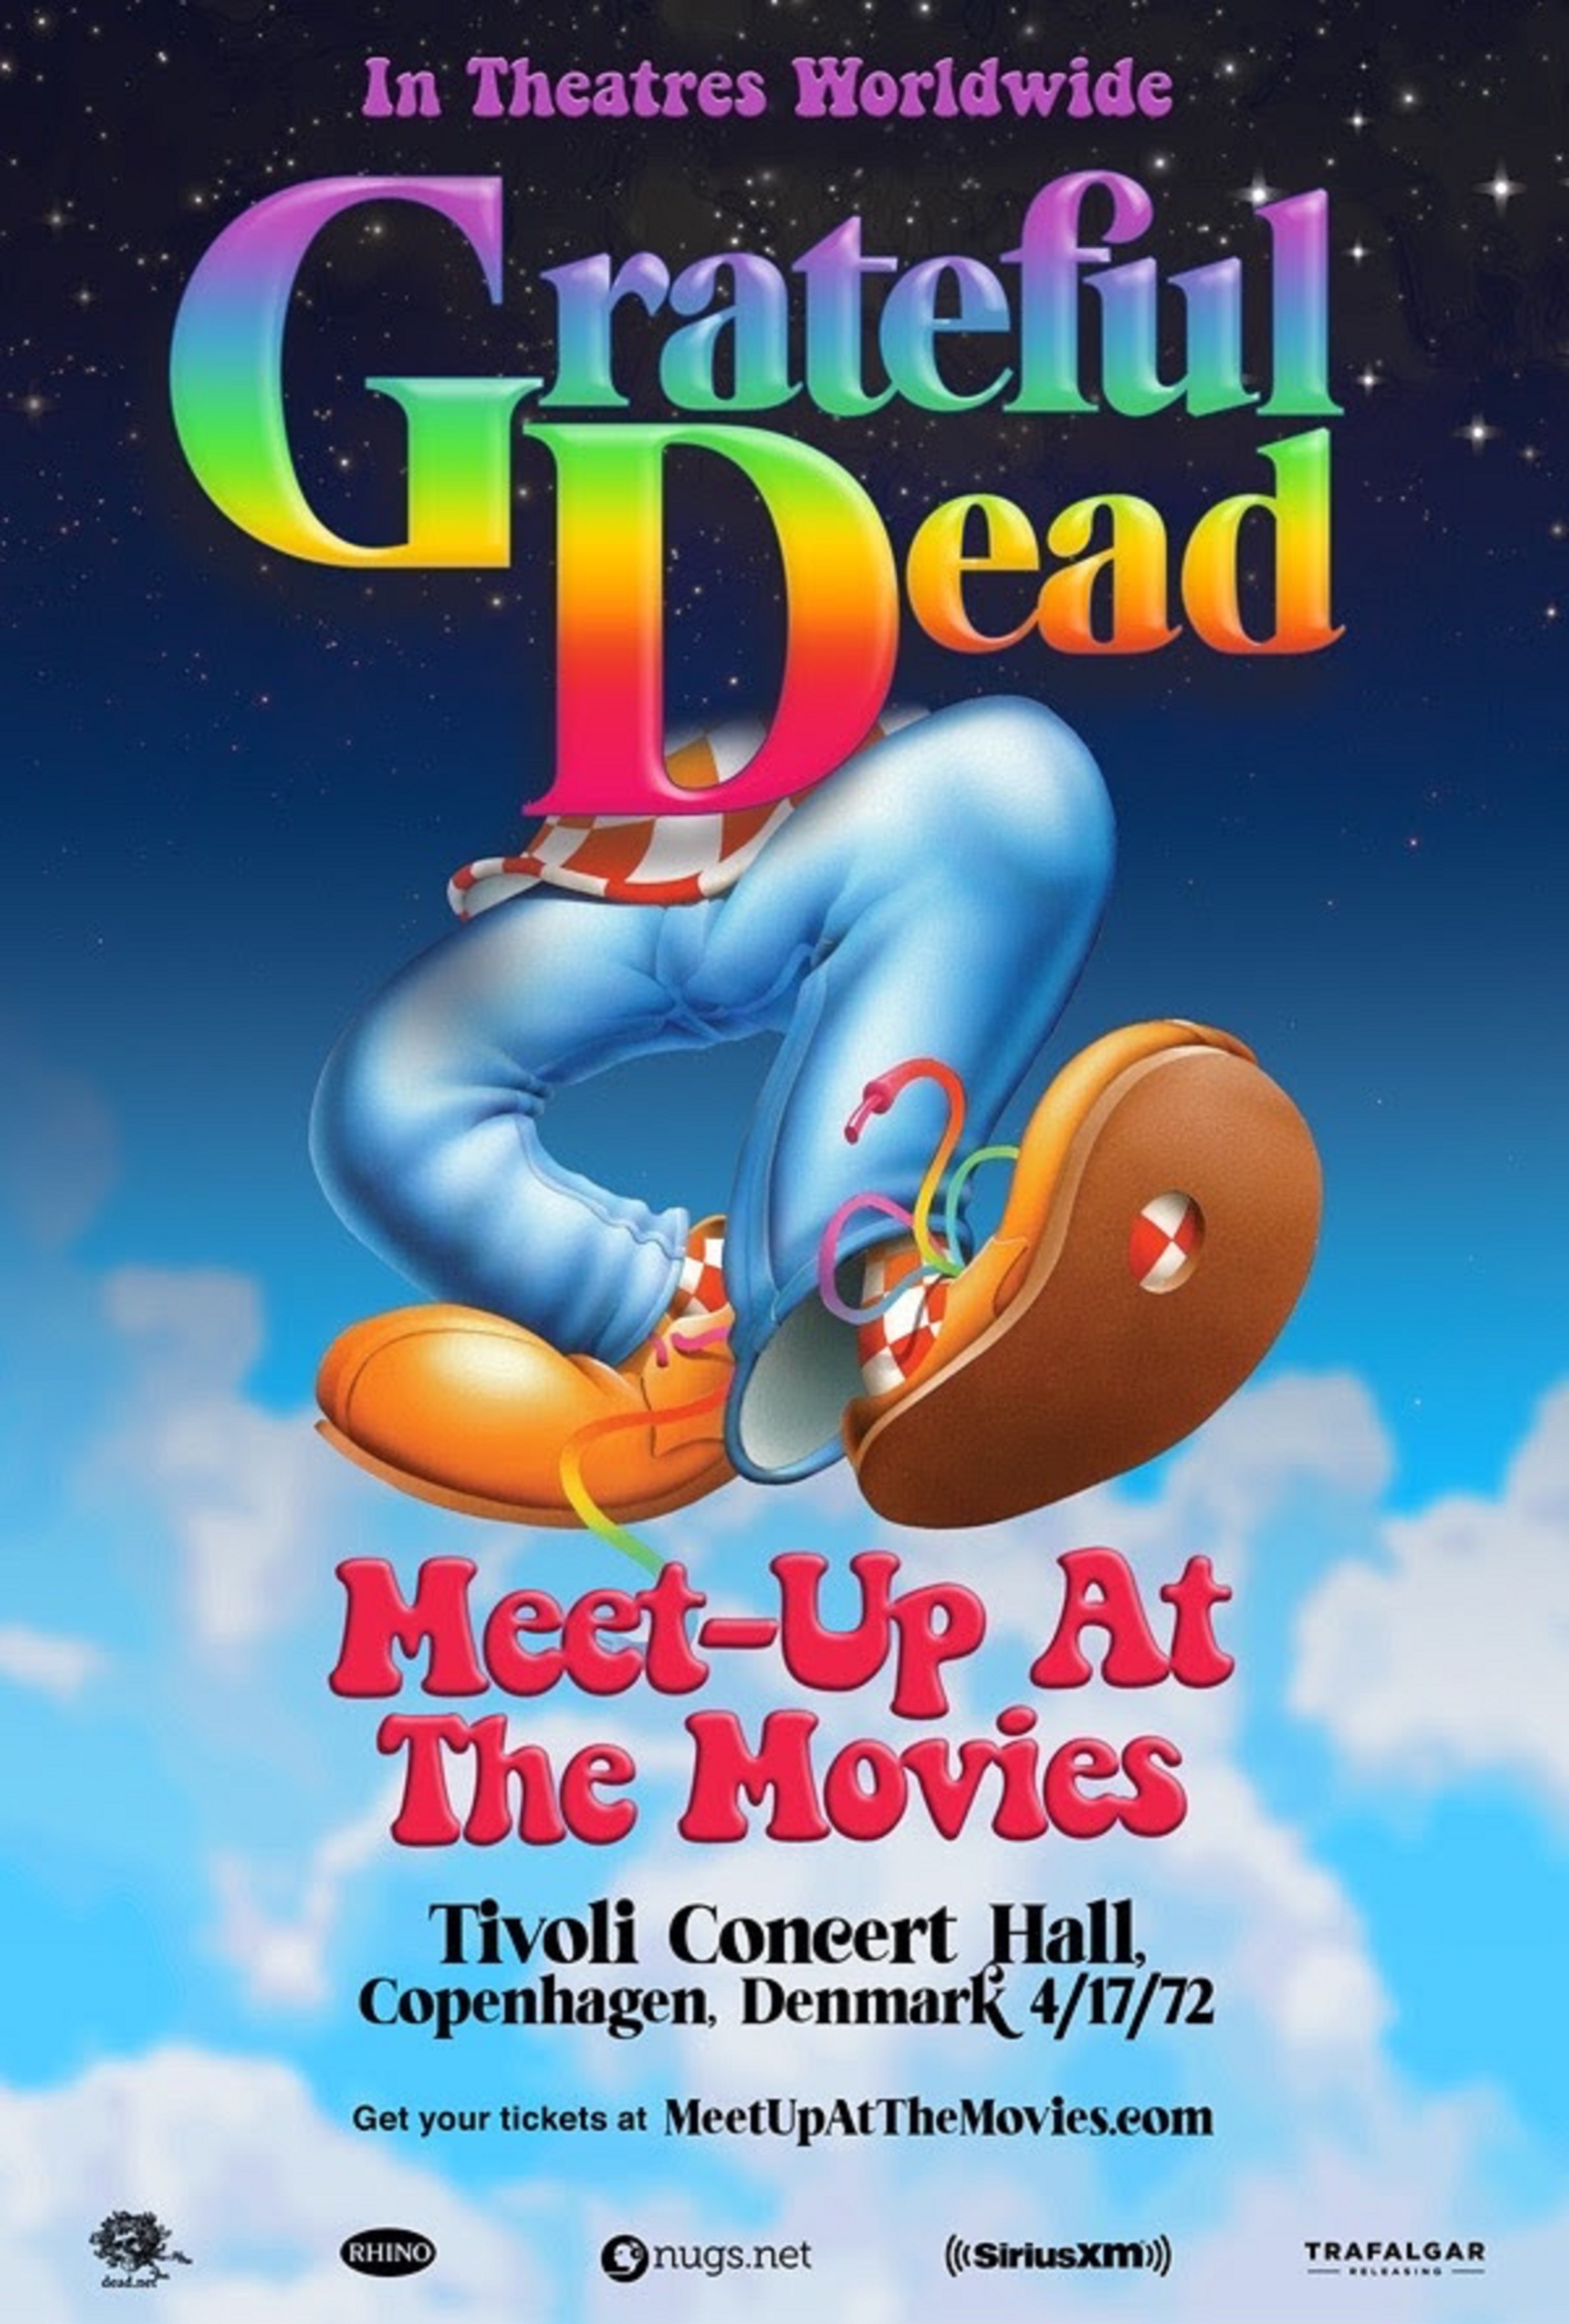 The Grateful Dead Meet-Up At The Movies Returns